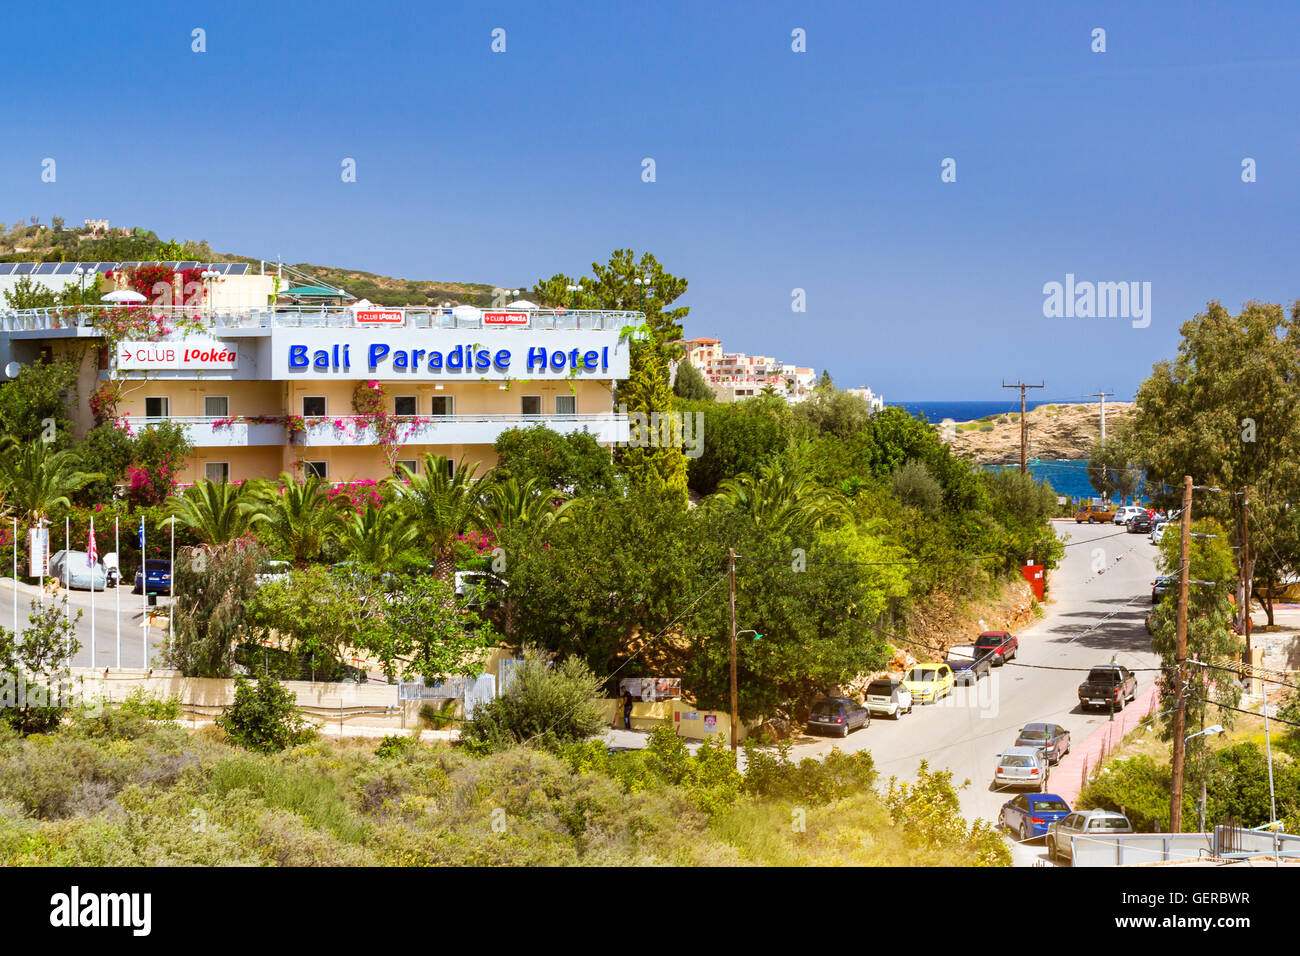 BALI, GREECE - APRIL 29, 2016: Exterior of resort Bali Paradise Hotel  building surrounded by tropical gardens on paved street Stock Photo - Alamy